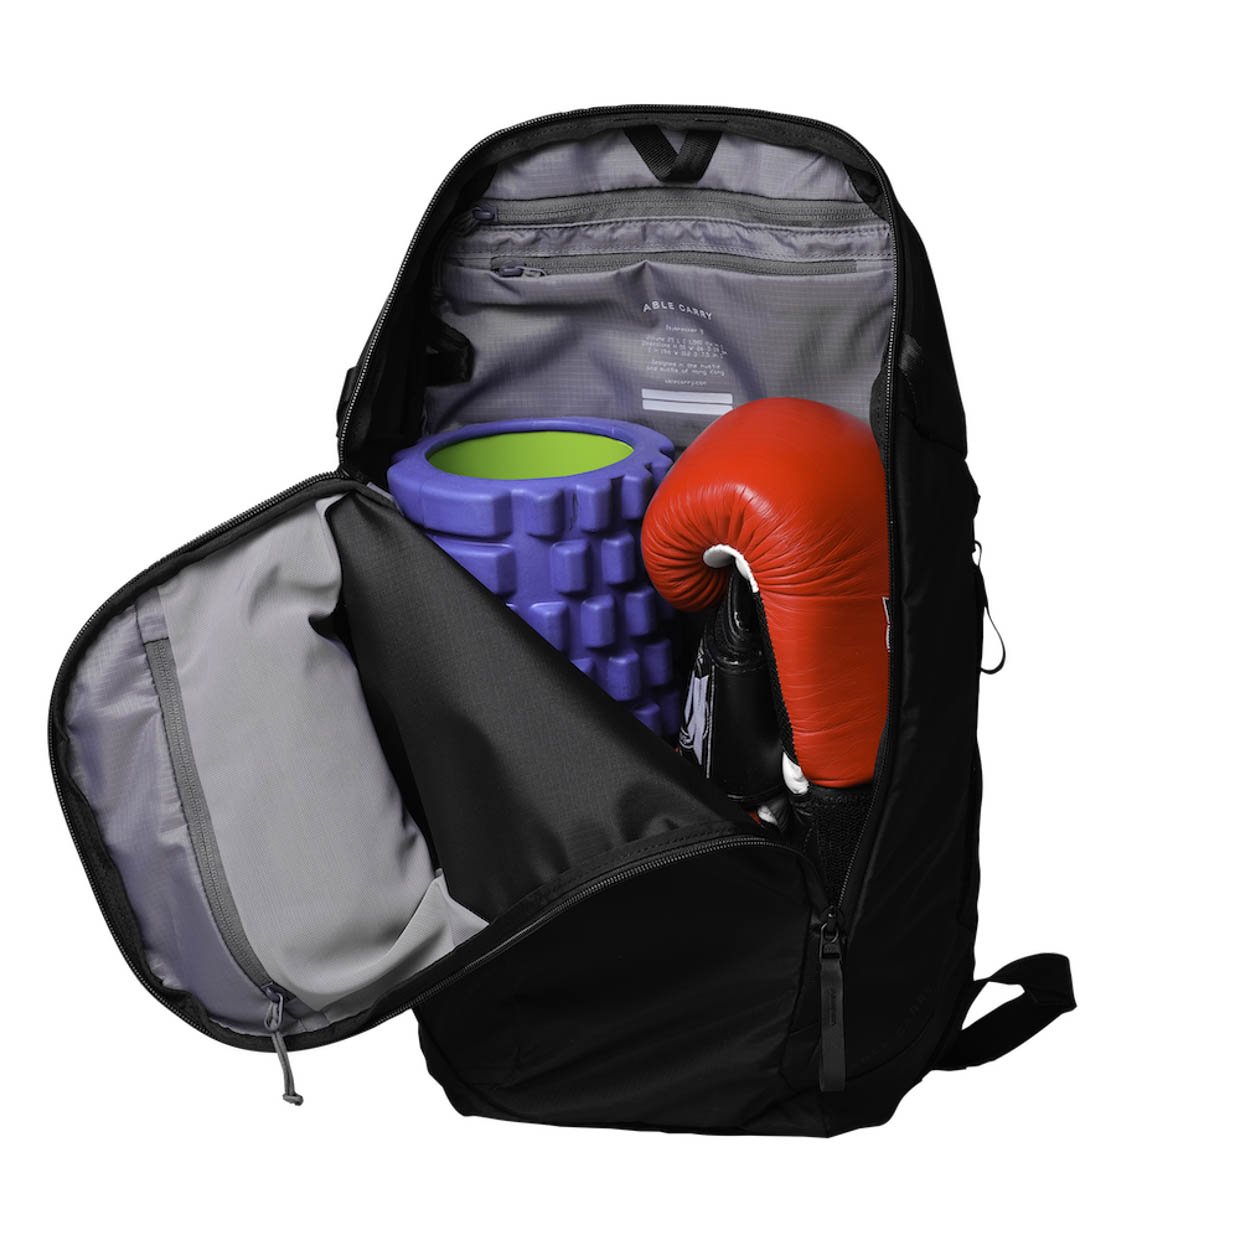 Able Carry Daybreak 2 Backpack